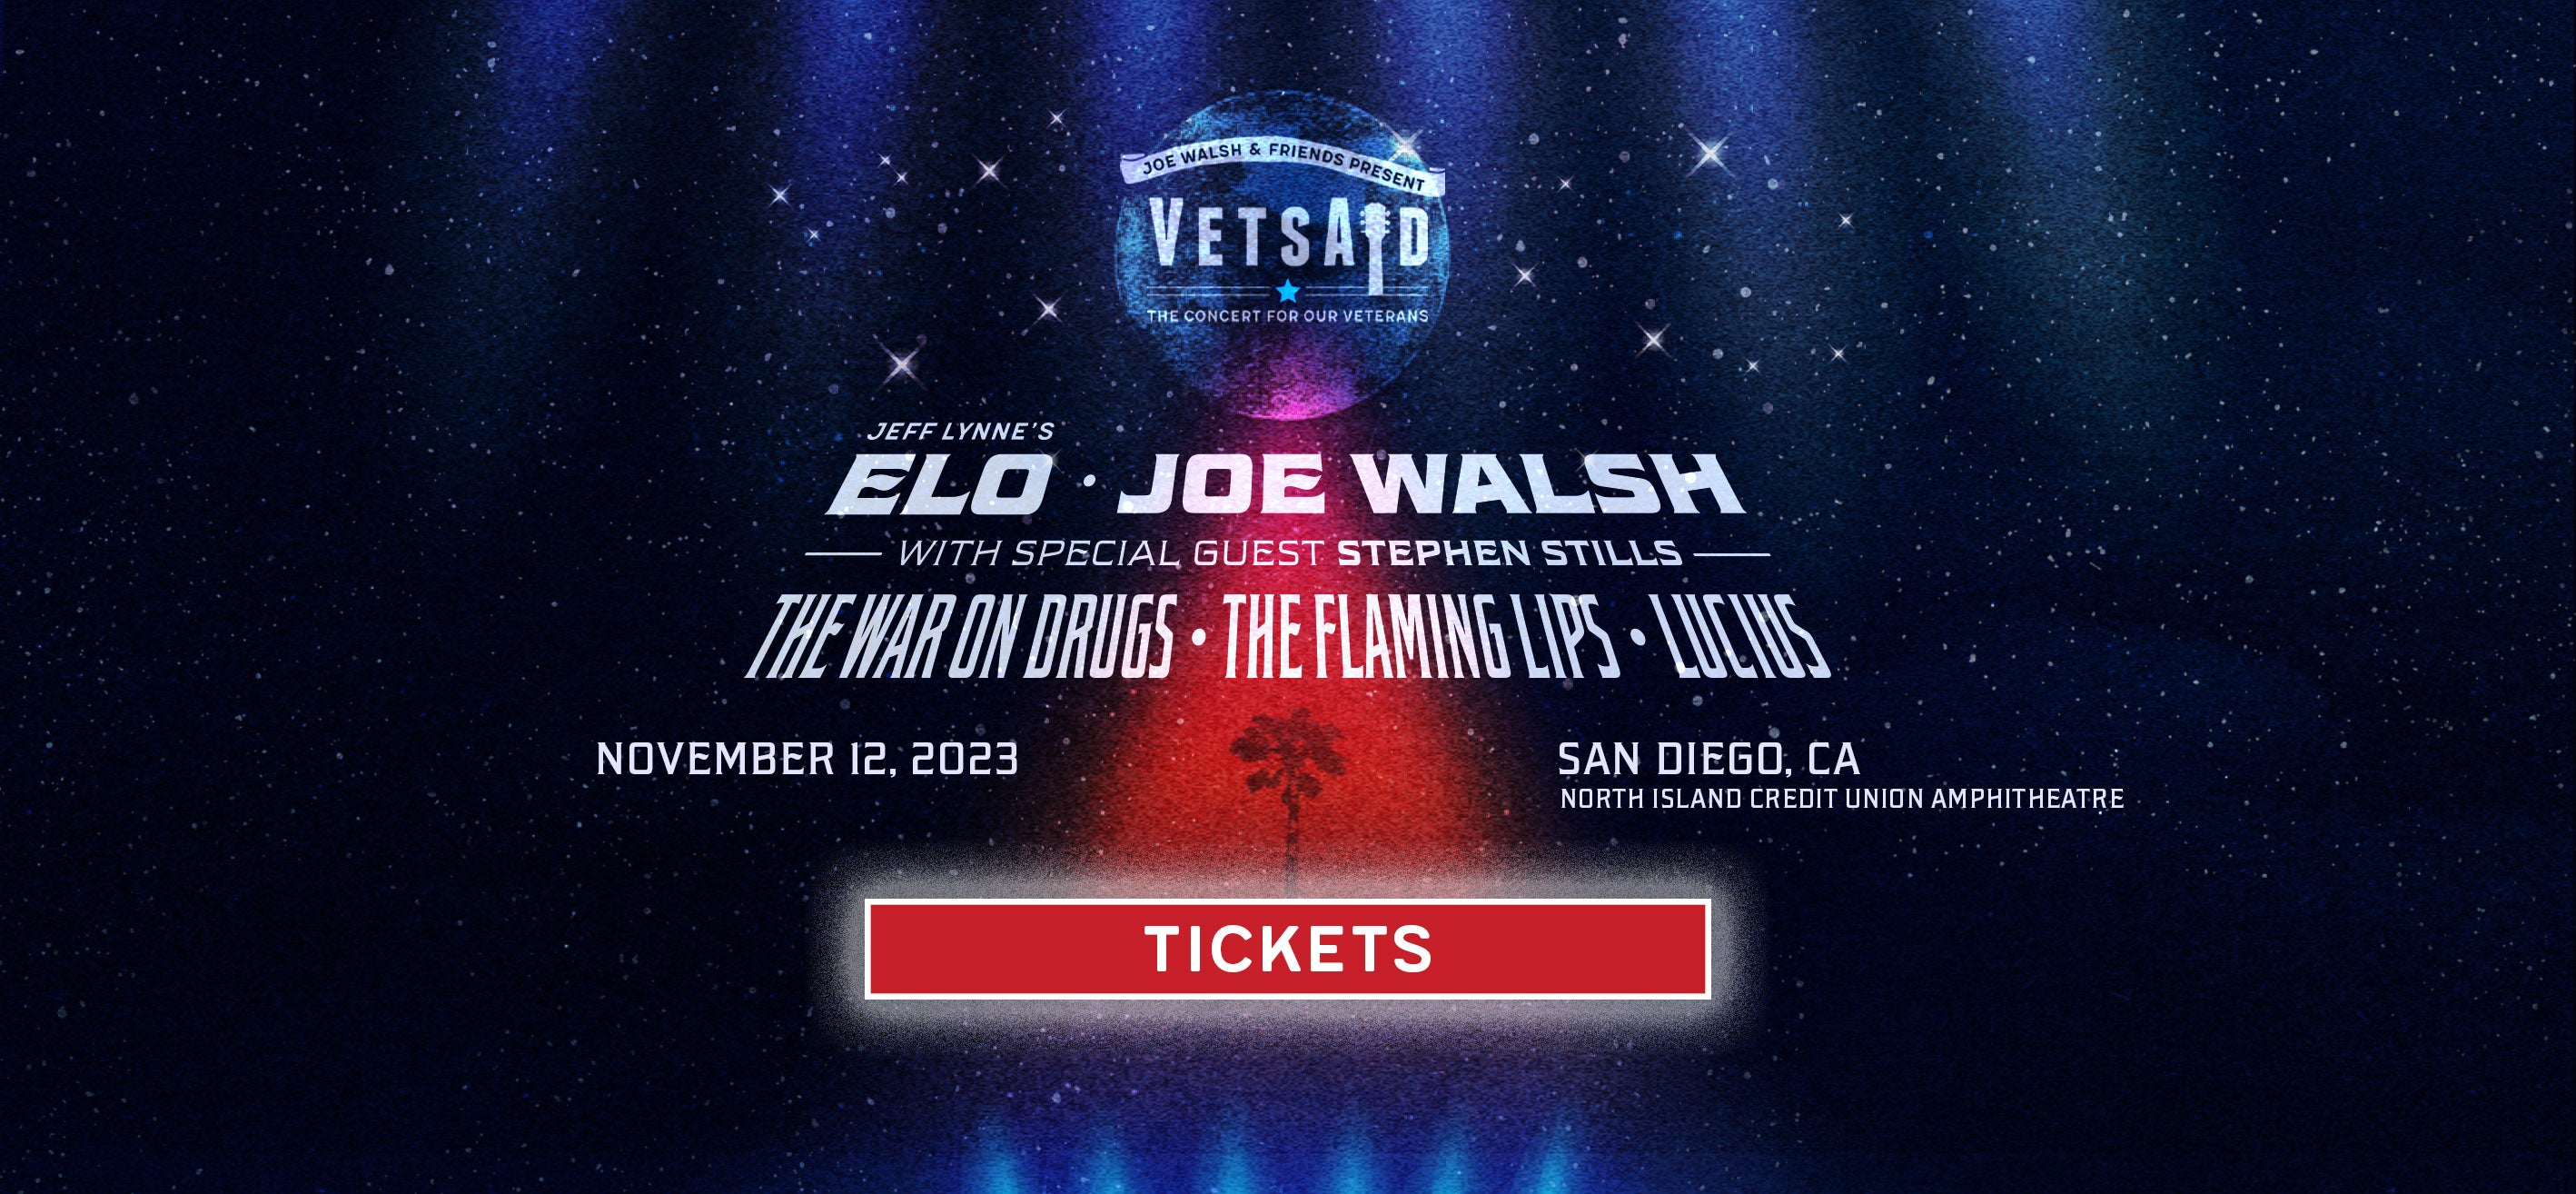 VetsAid November 12, 2023 - San Diego, CA - North Island Credit Union Amphitheatre - Get Tickets - ELO, Joe Walsh, with special guests Stephen Stills, The War On Drugs, The Flaming Lips, Lucius